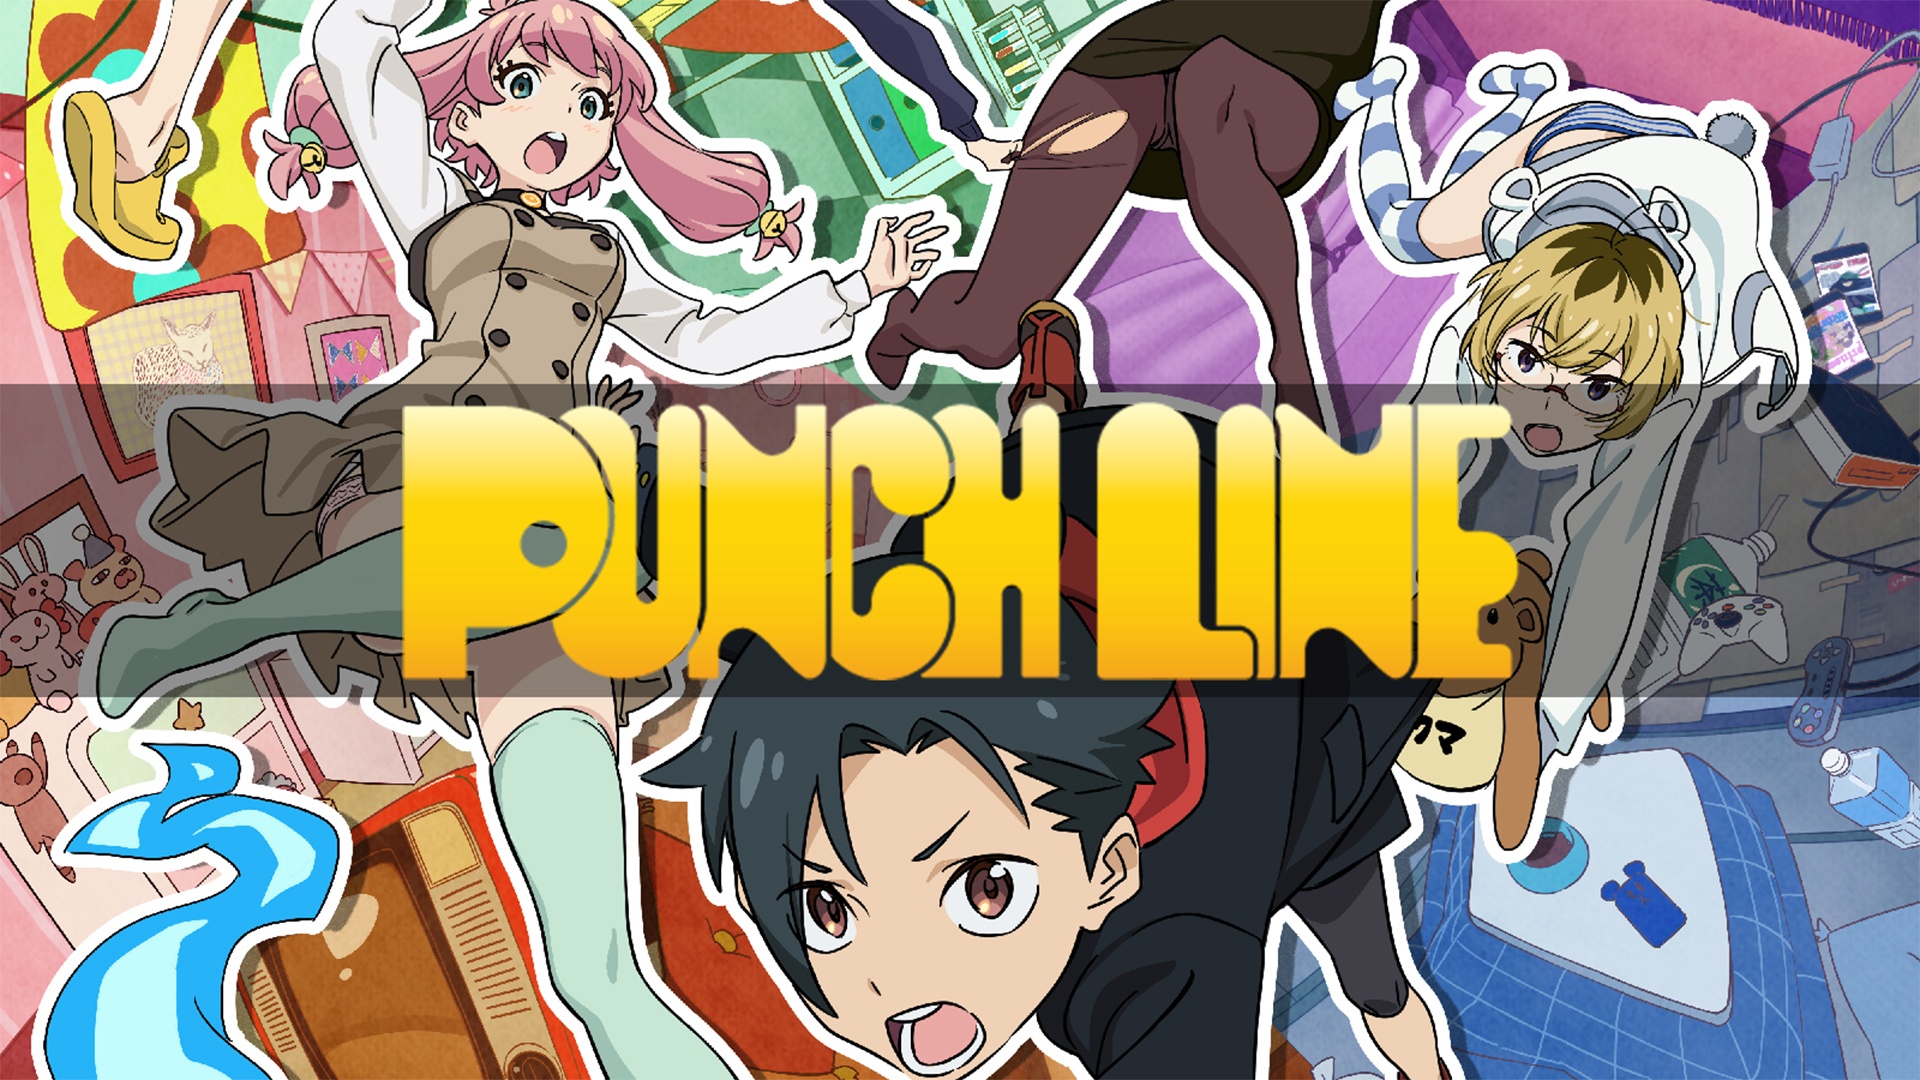 PunchLine Ito (and Muhi) sketch! | Punch line anime, Anime, Illustration